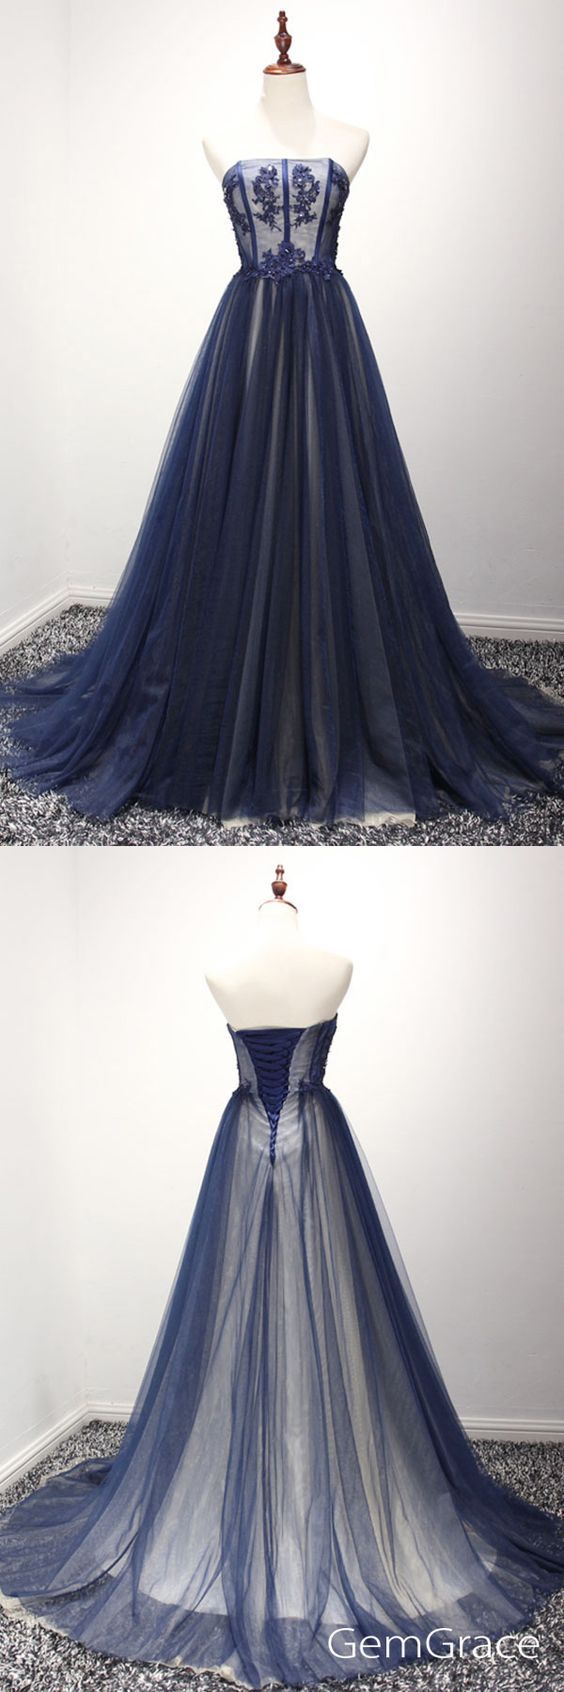 Strapless Navy Blue Tulle A-line Long Evening Dress With Appliques And Beads